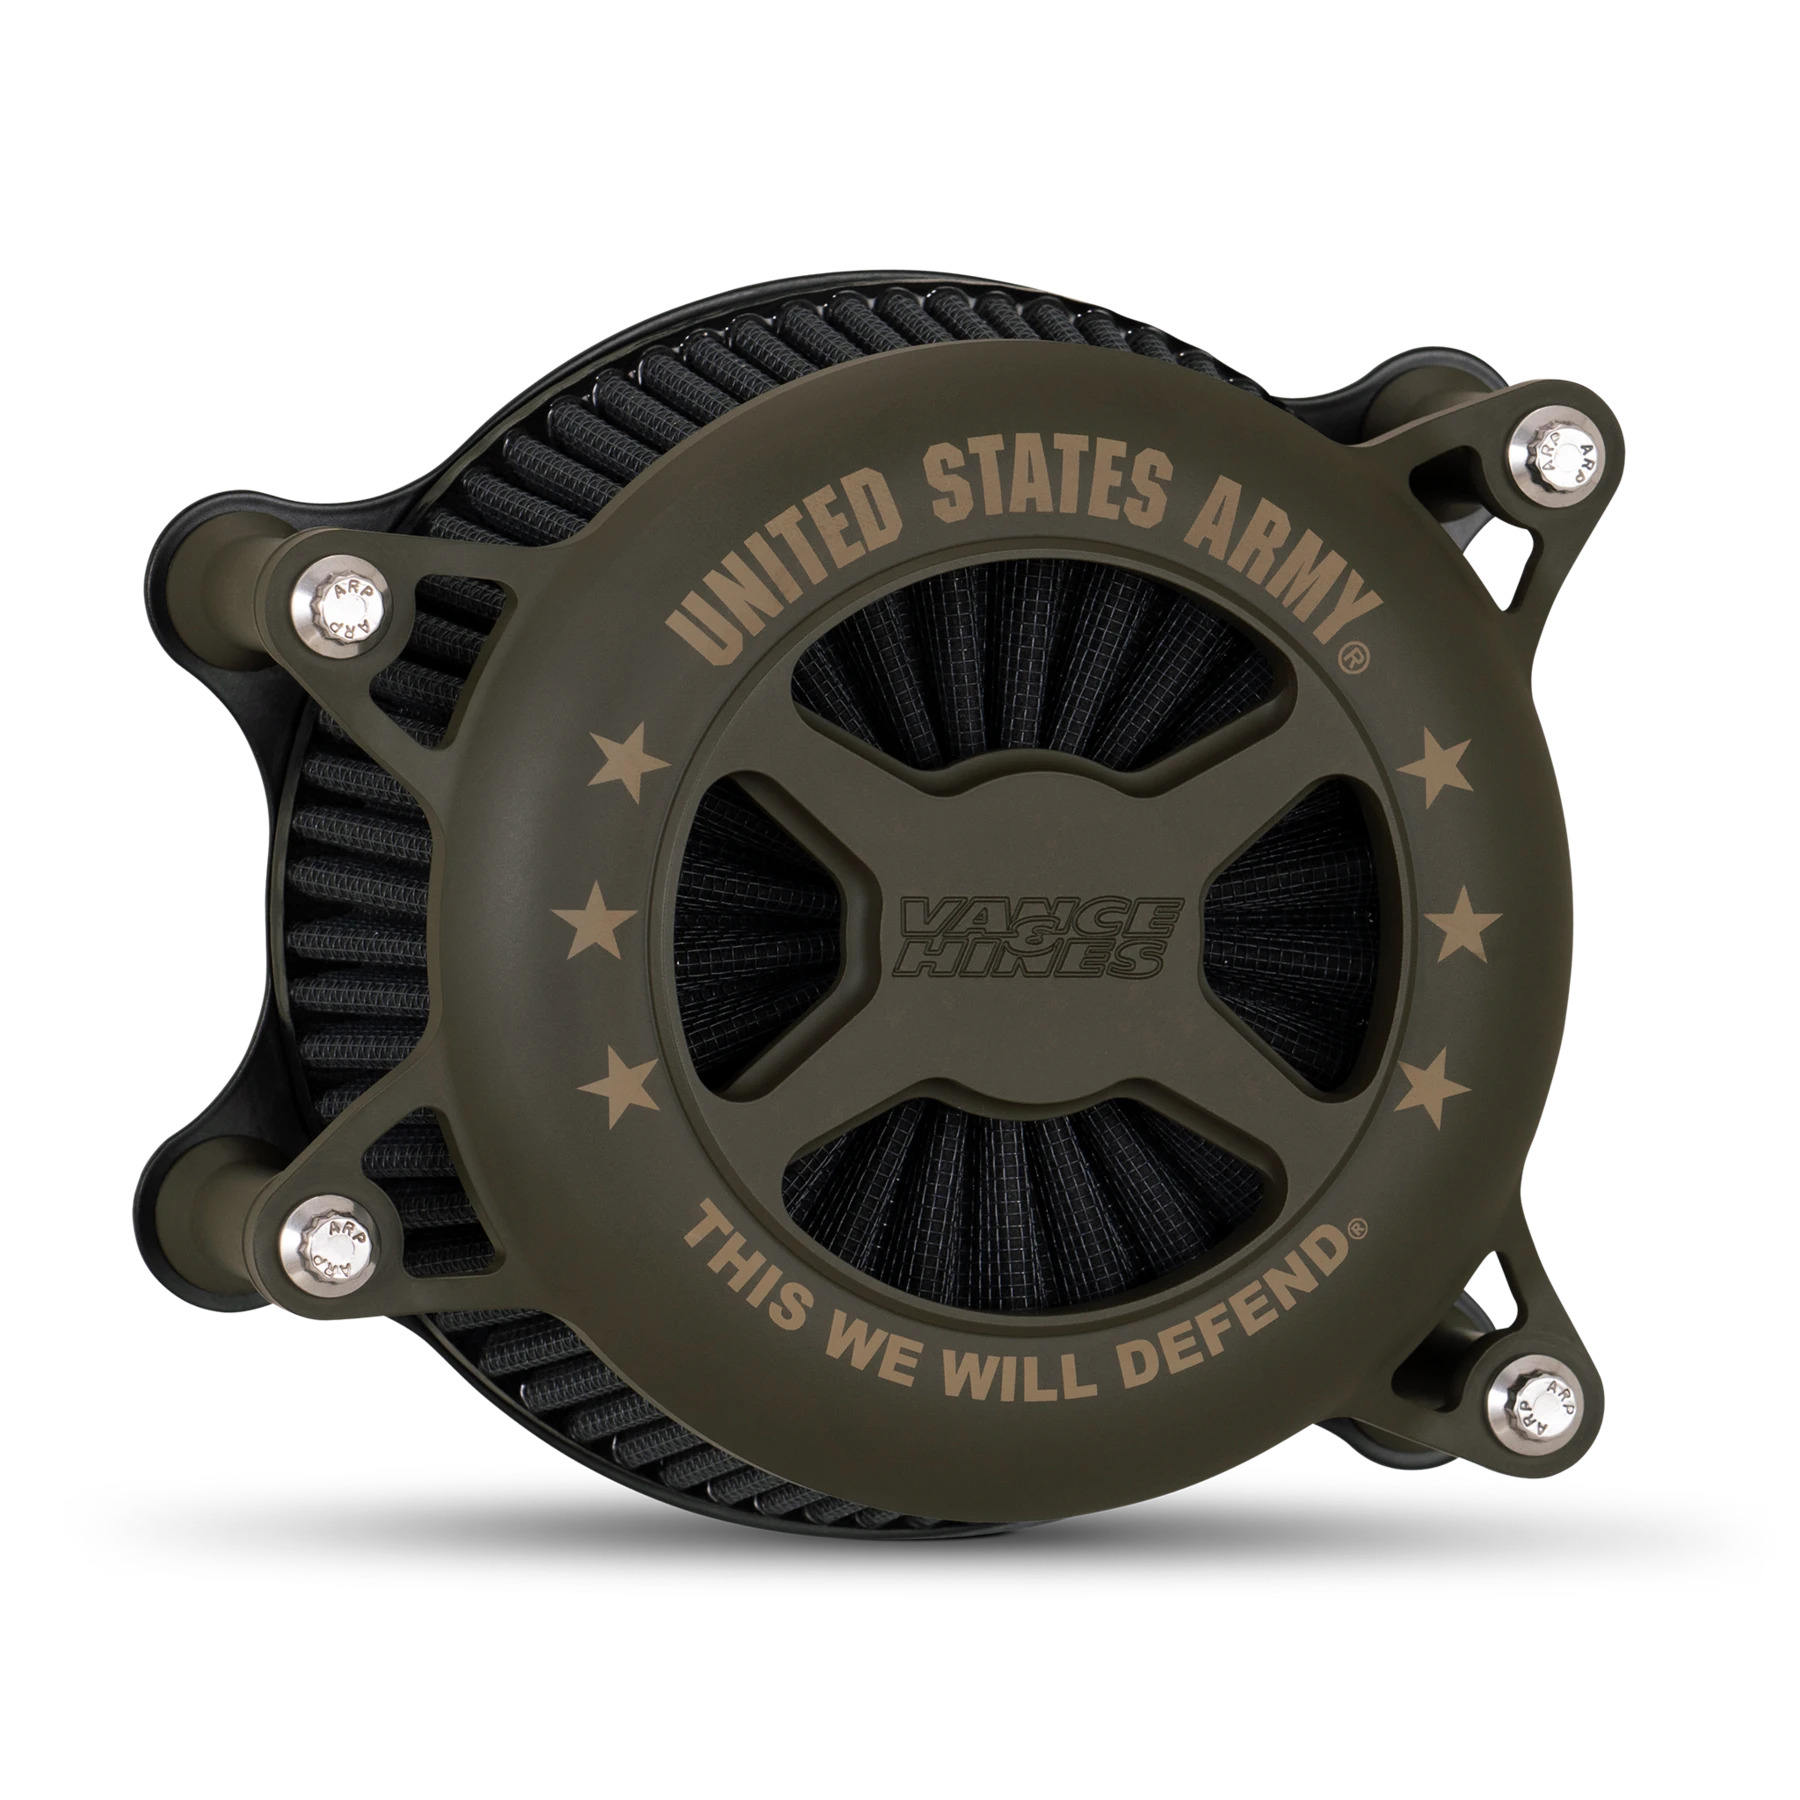 Vance & Hines Air Intake from their VO2 Military Power Series: Army